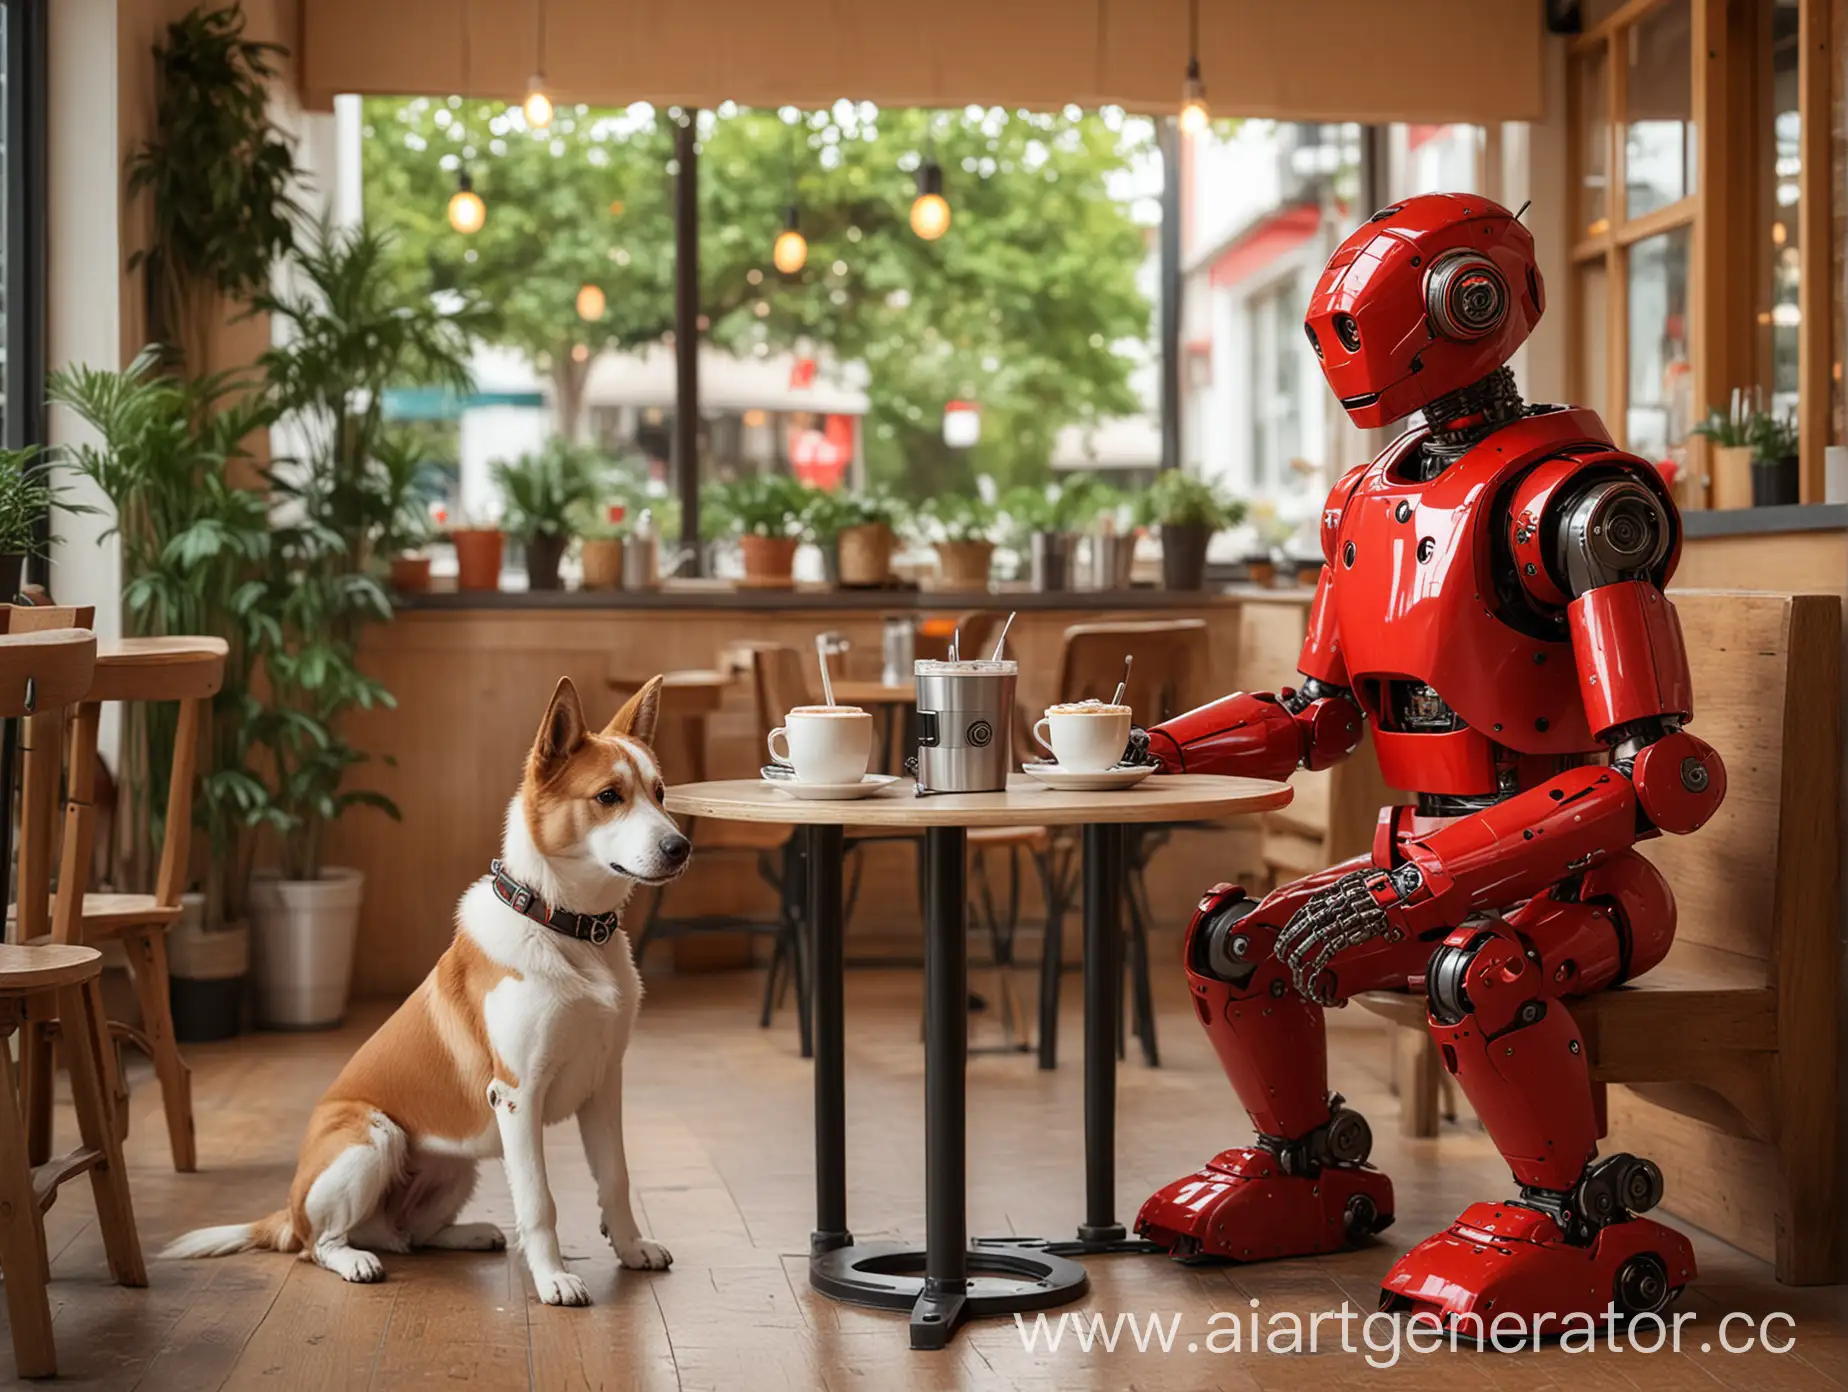 Red-and-Dog-Robots-Relaxing-in-a-Charming-Caf-Scene